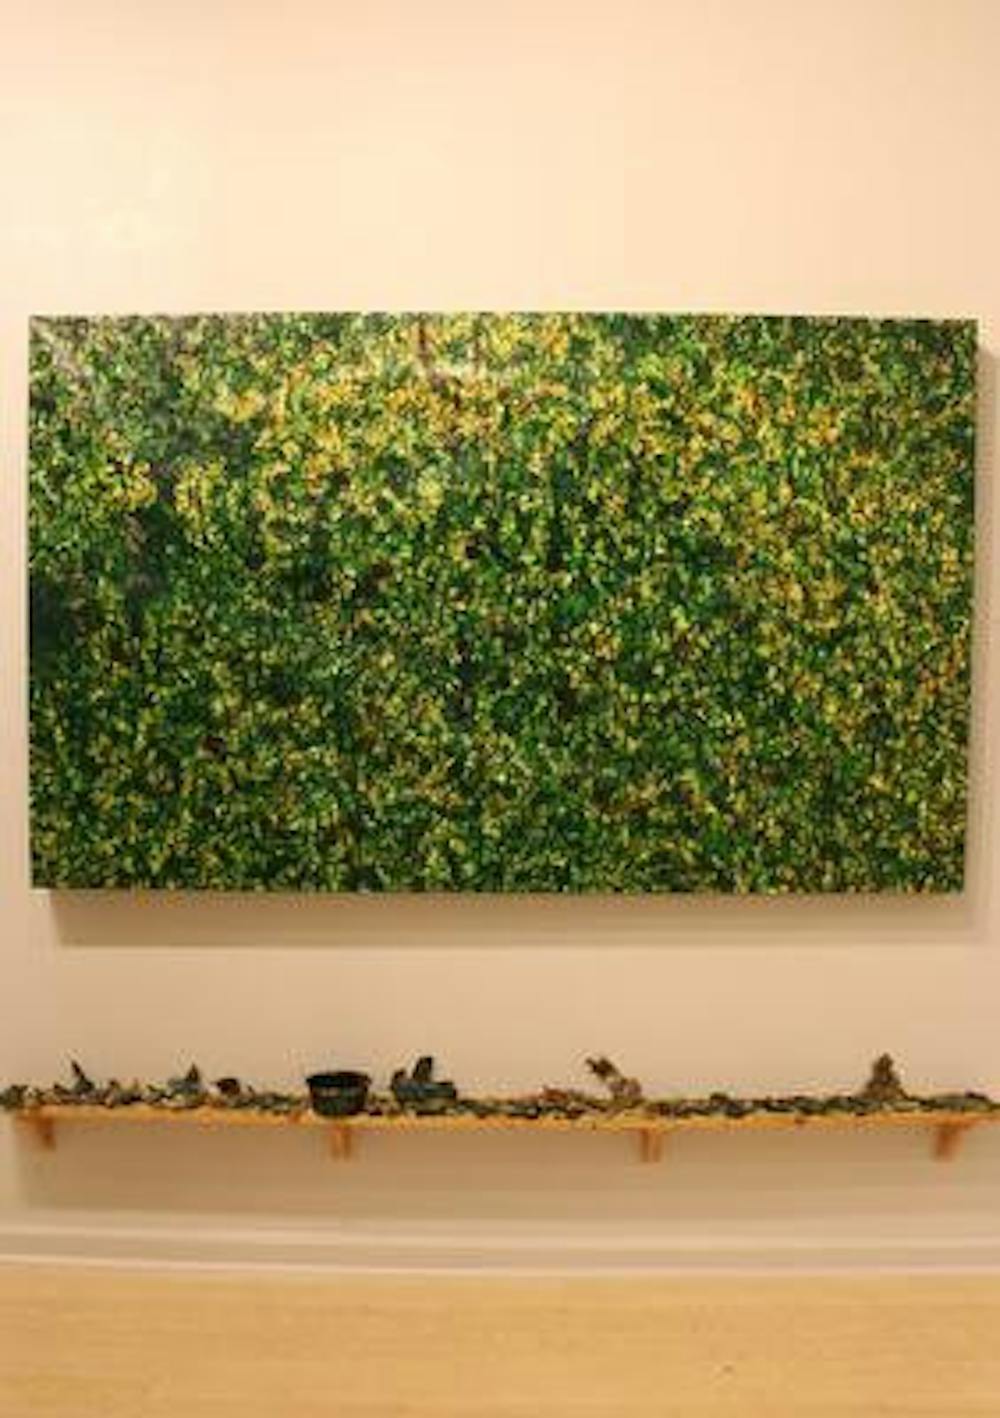 Charlie Agnew's art exhibit is meant to make the viewers feel as if they are in a forest.